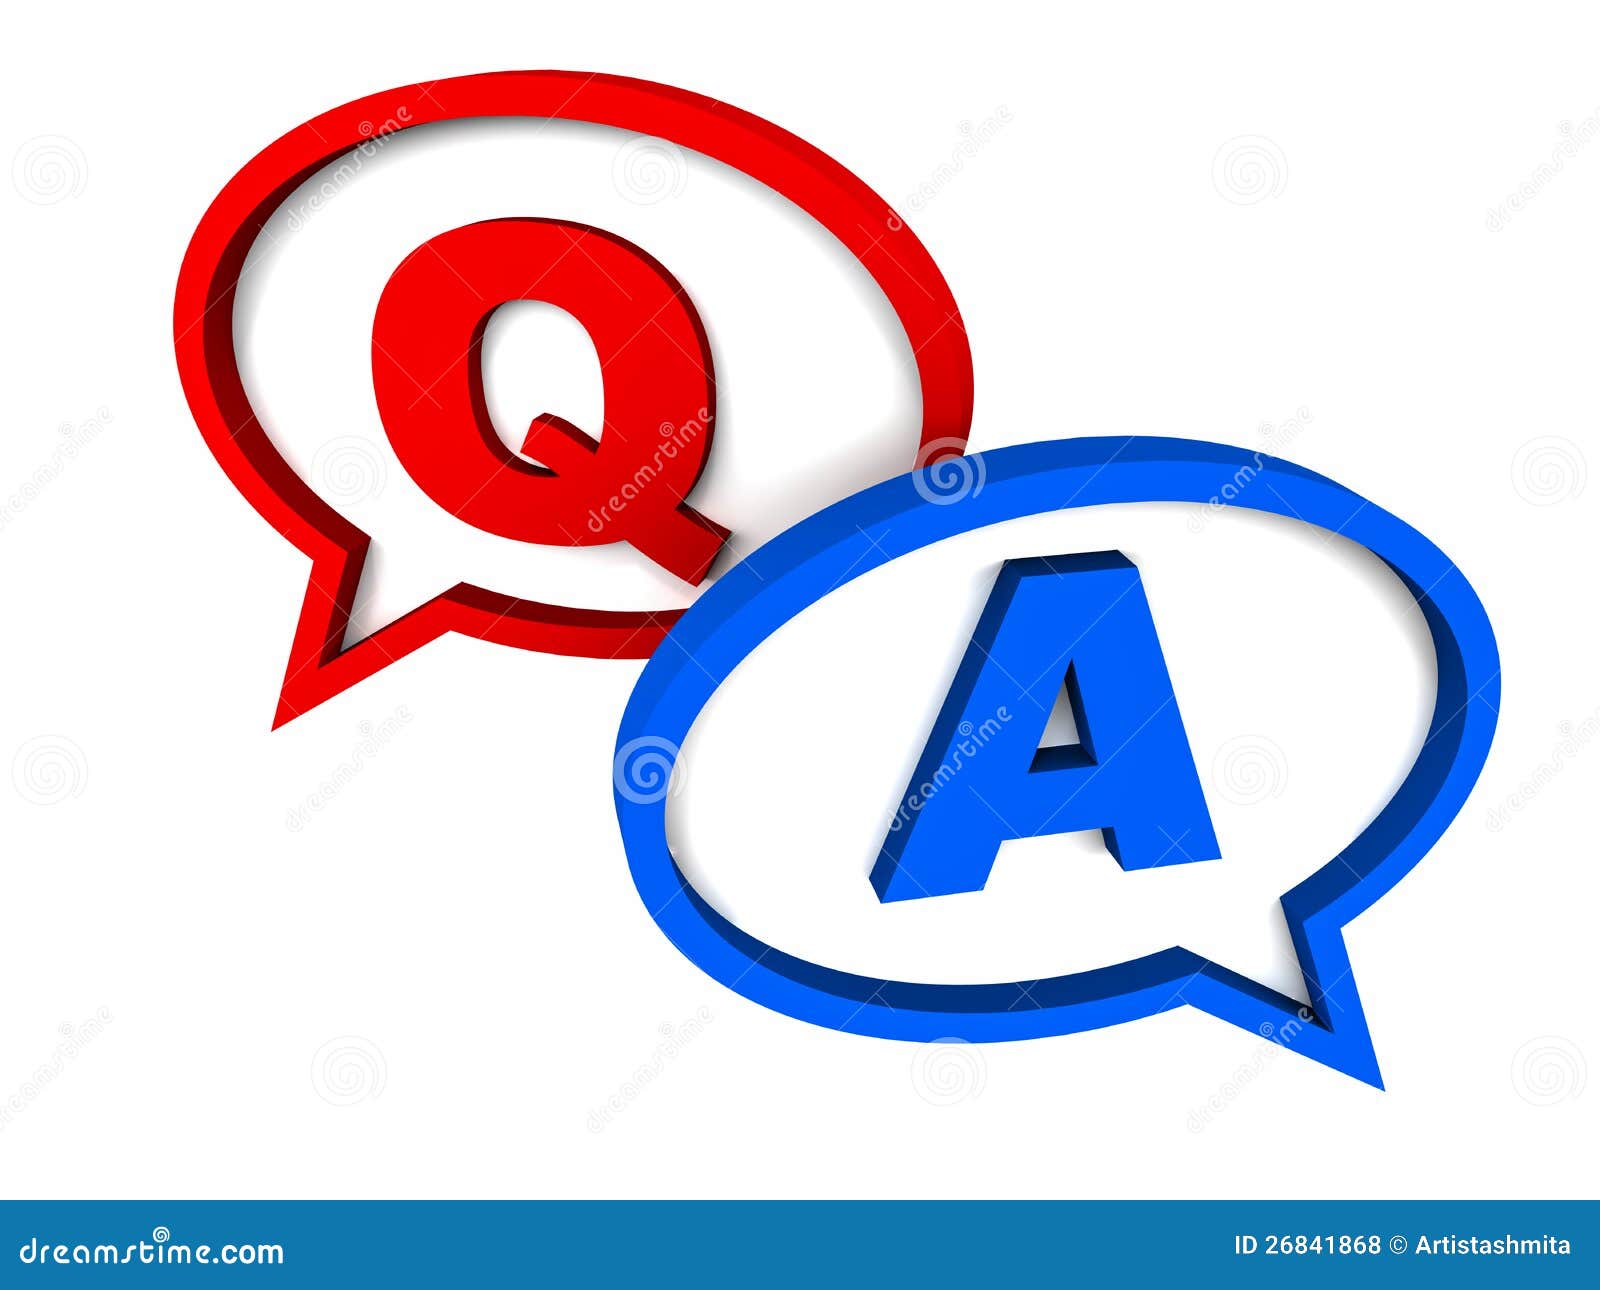 question and answer clipart - photo #34